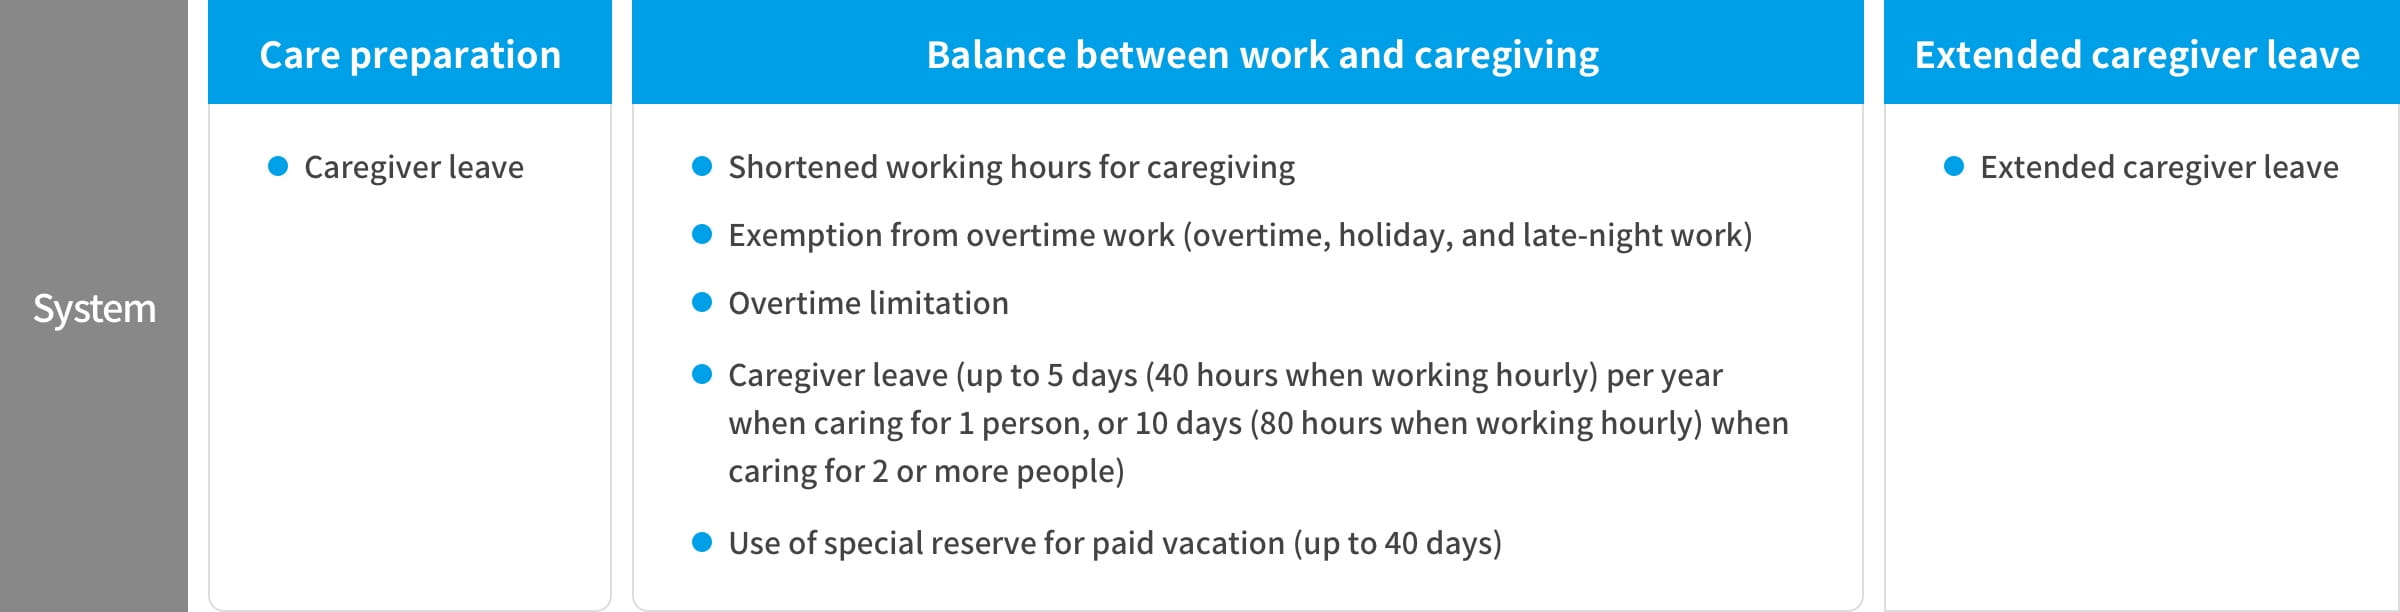 System supporting a balance between work and caregiving